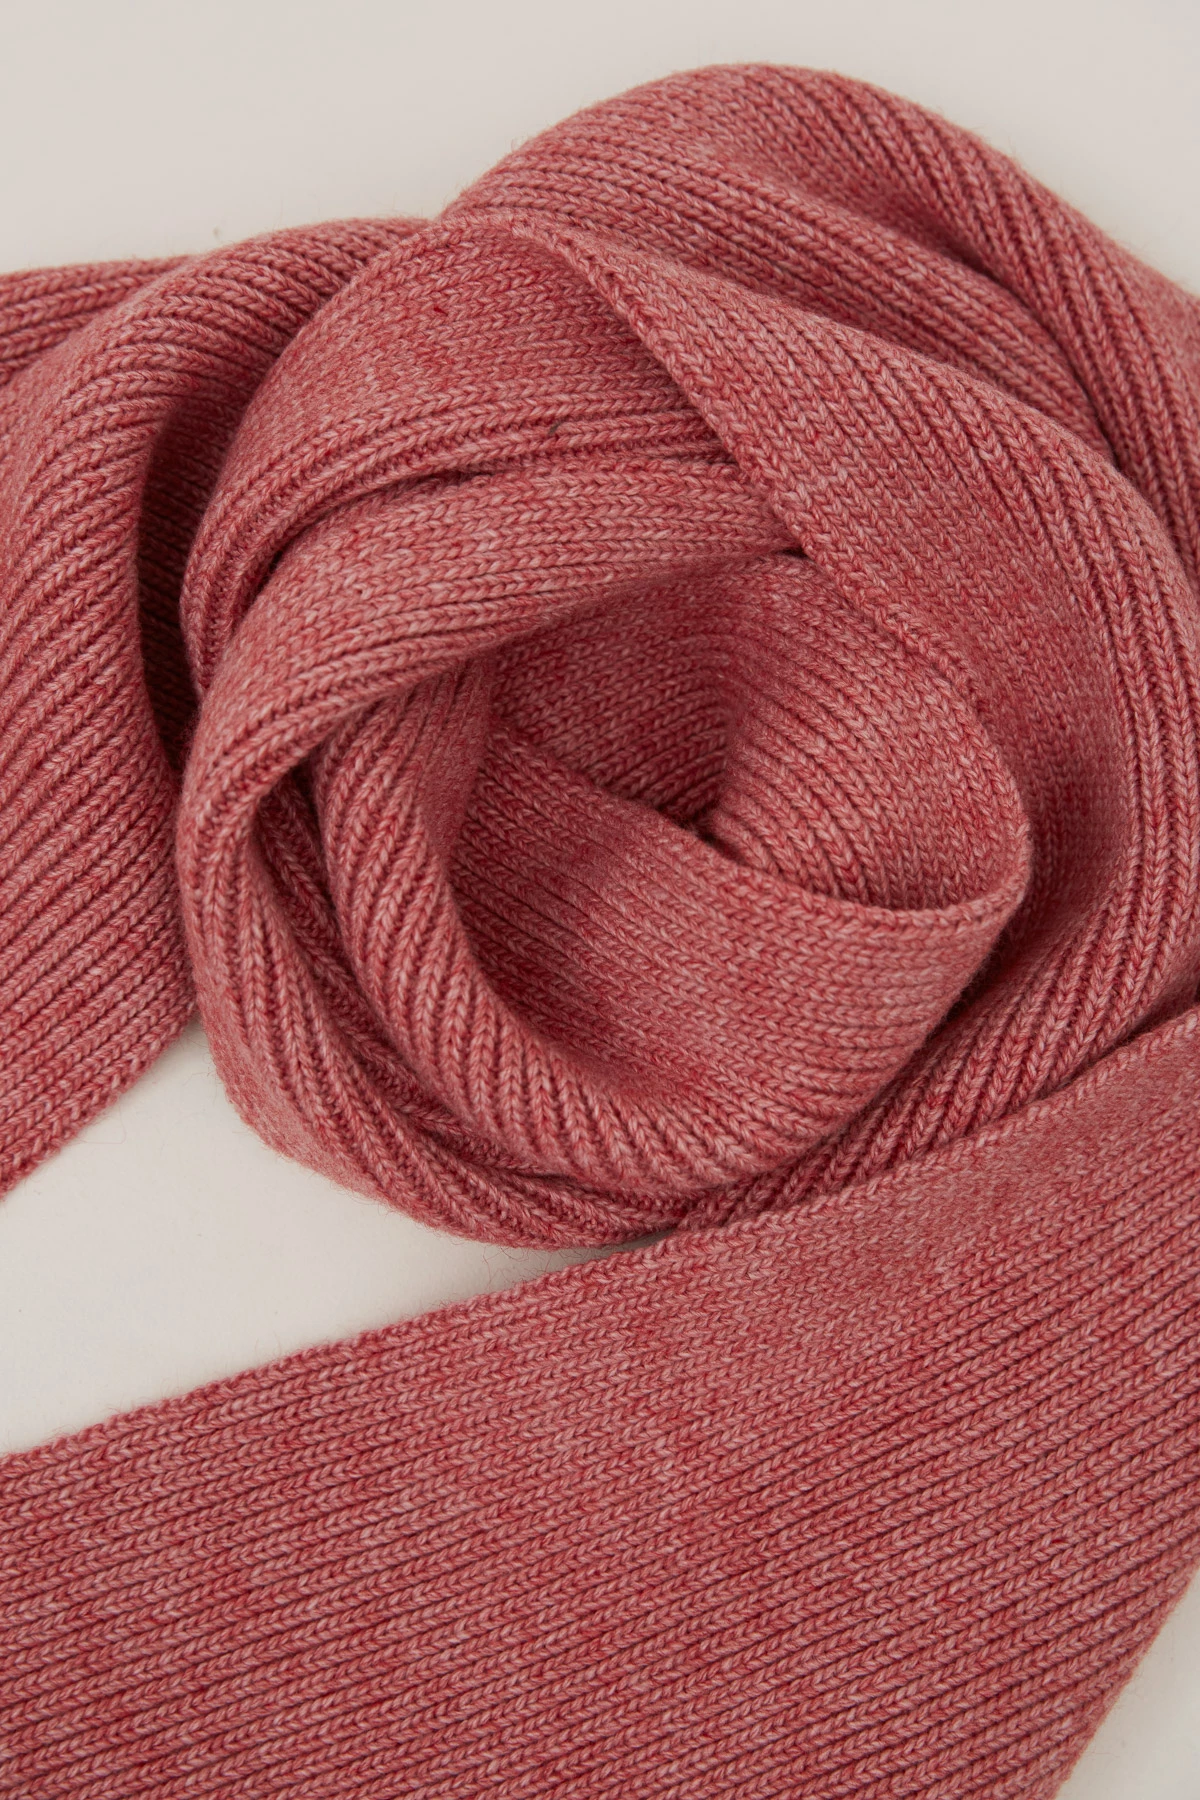 Knitted woolen pink scarf, photo 4